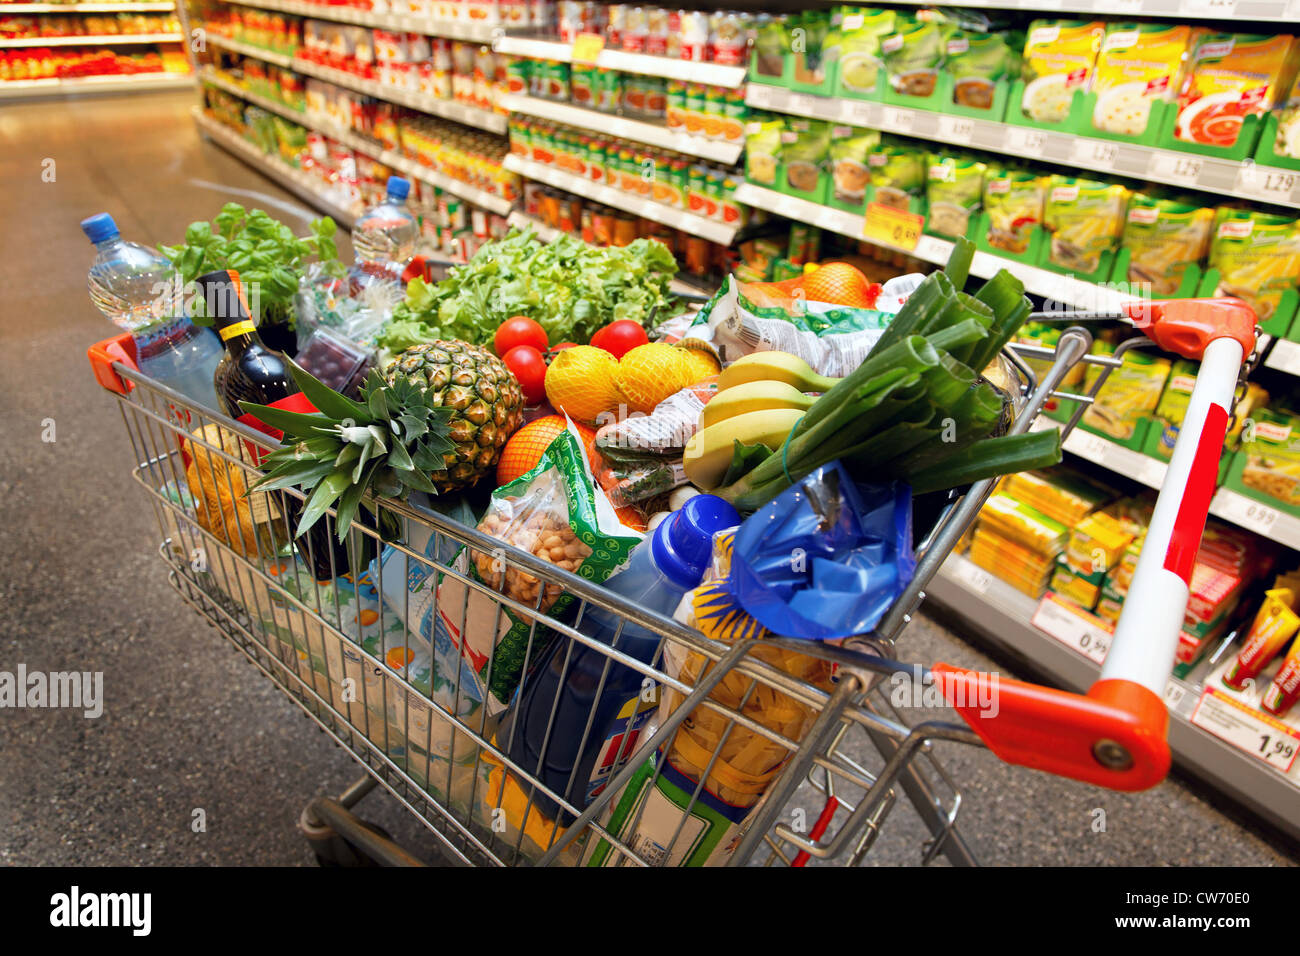 Full shopping cart with fruits, vegetables, food in supermarket Stock Photo